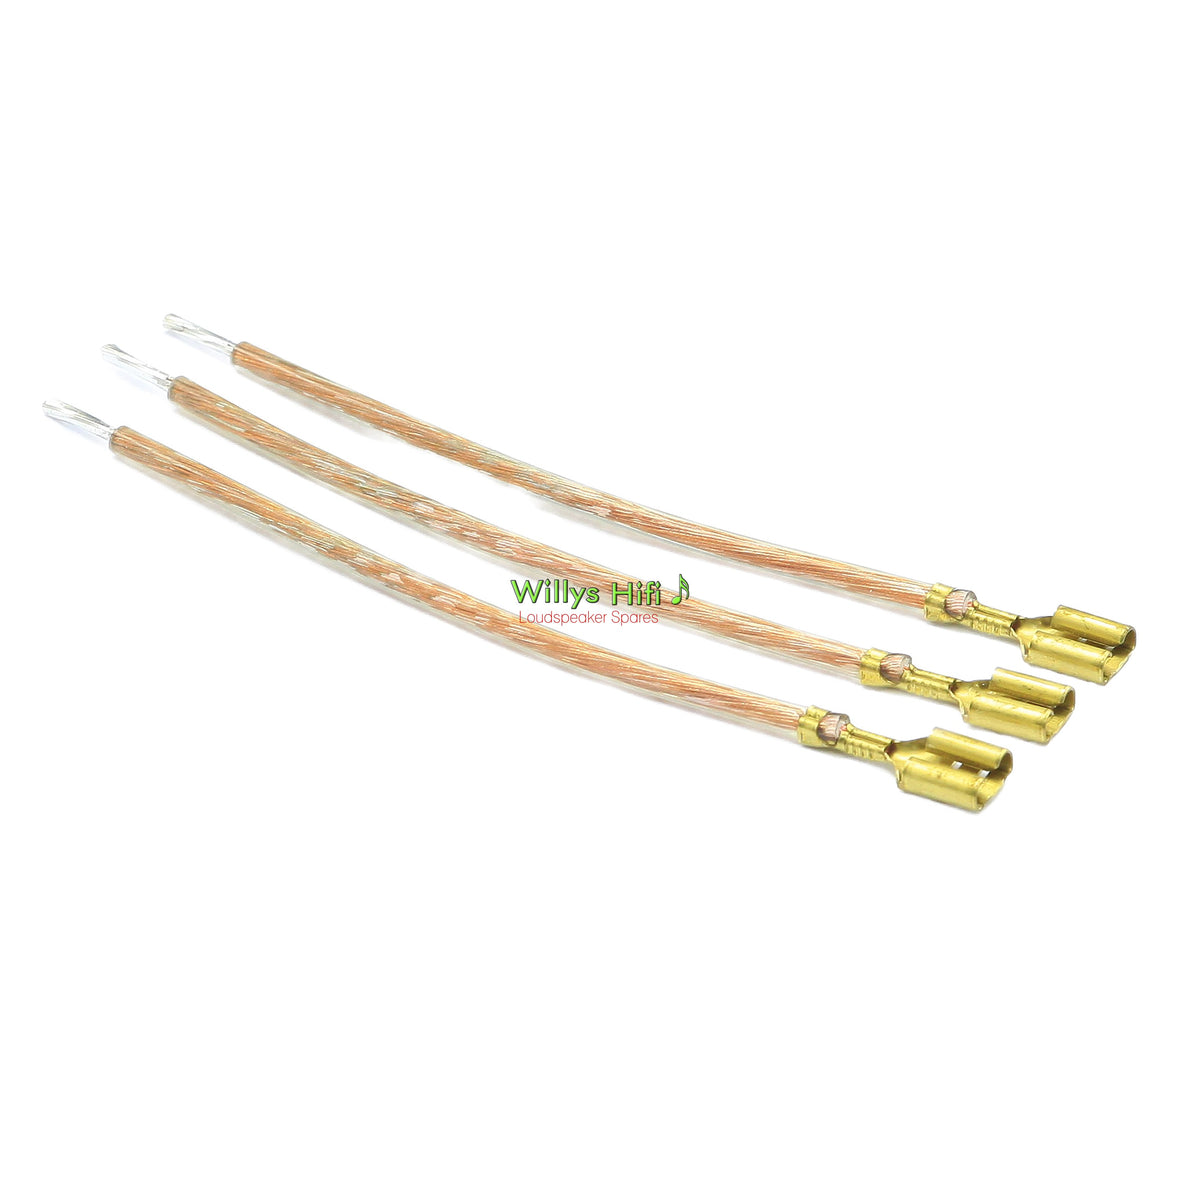 Intertechnik High Pass Crossover PCB 1500632 fly leads